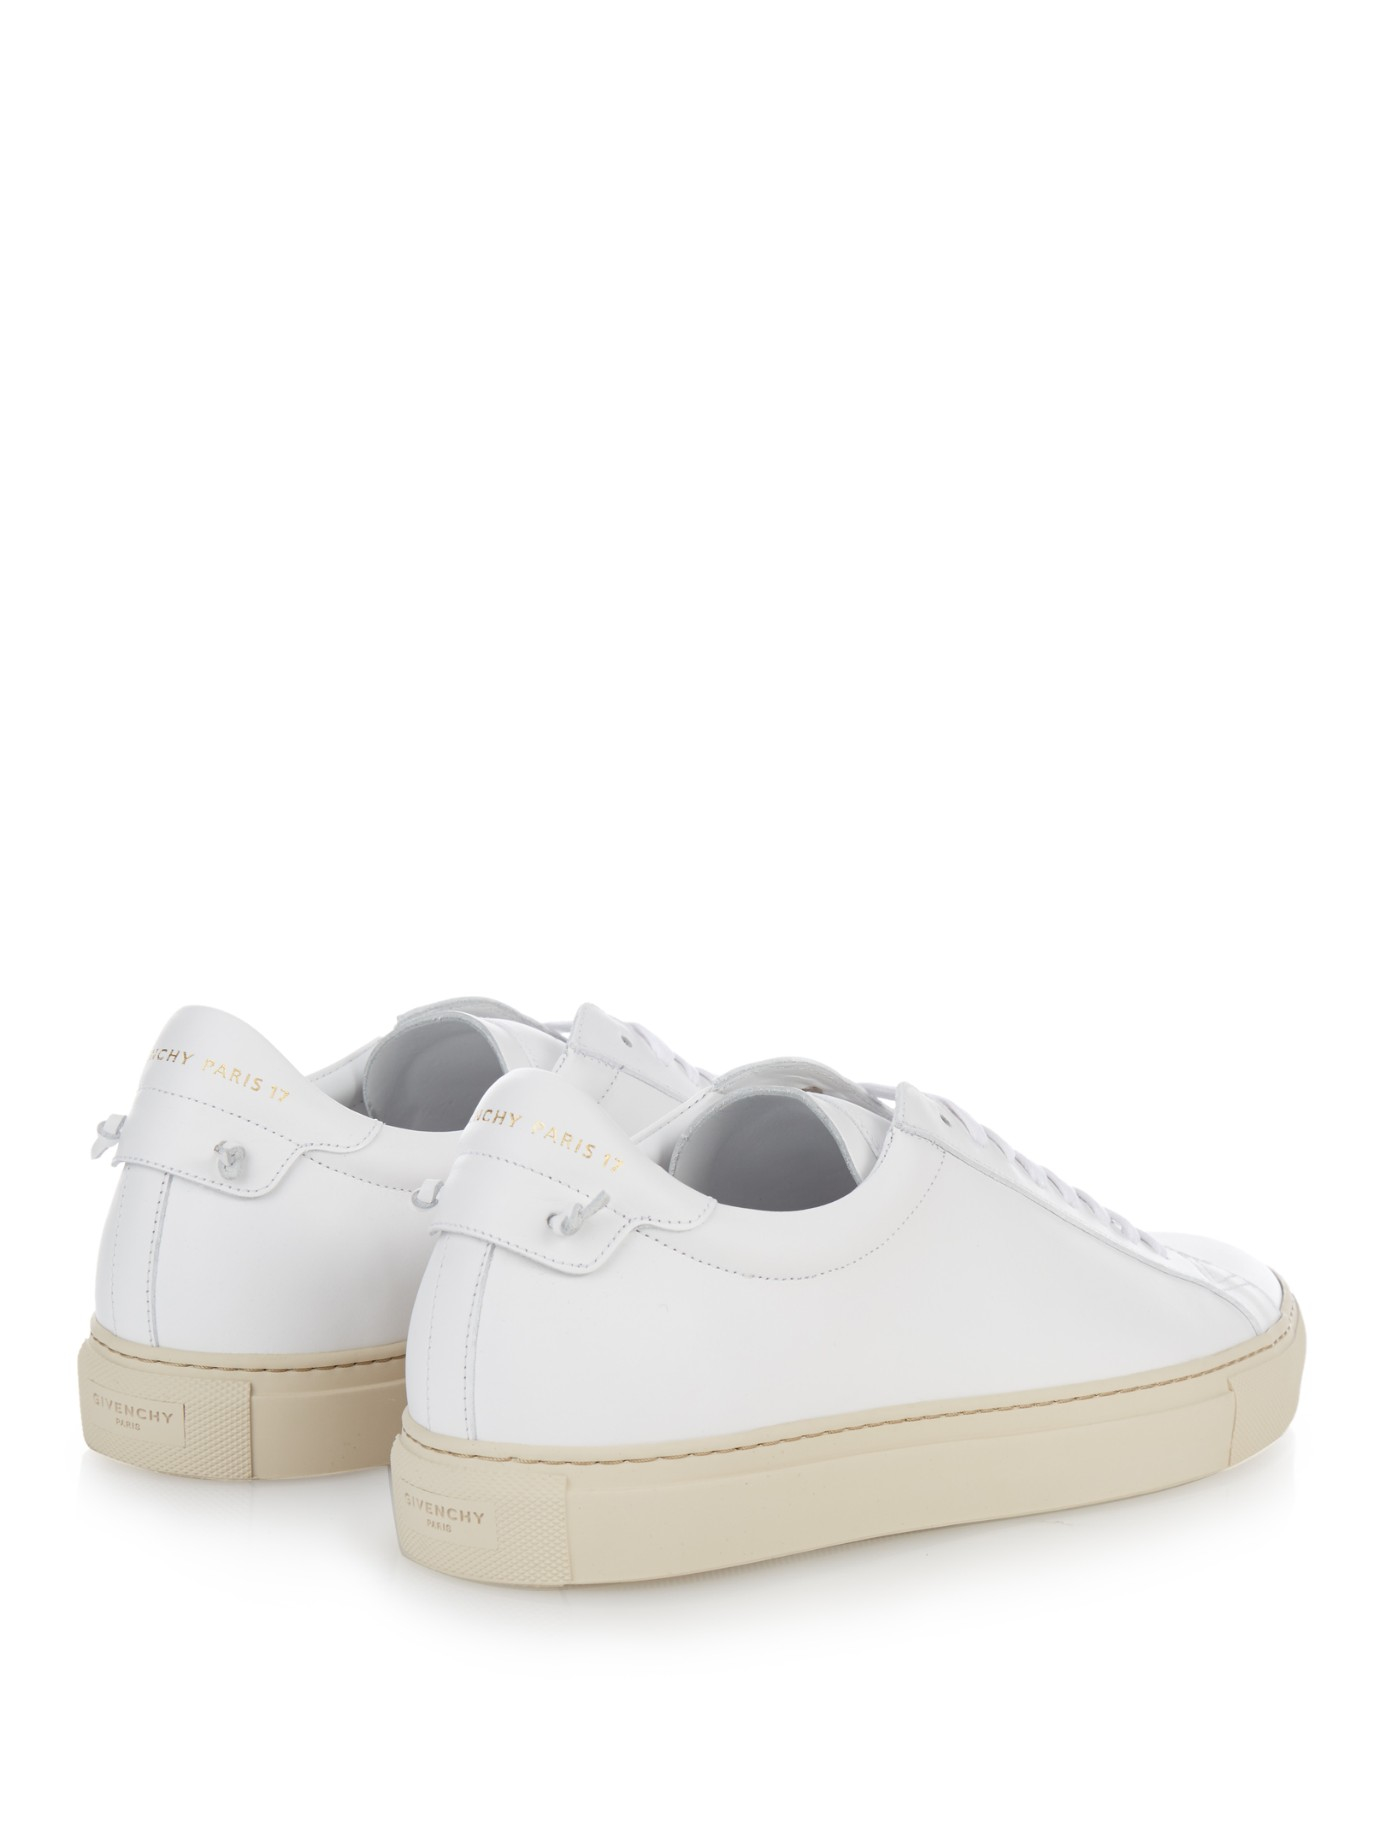 Givenchy Leather Low-Top Sneakers in 